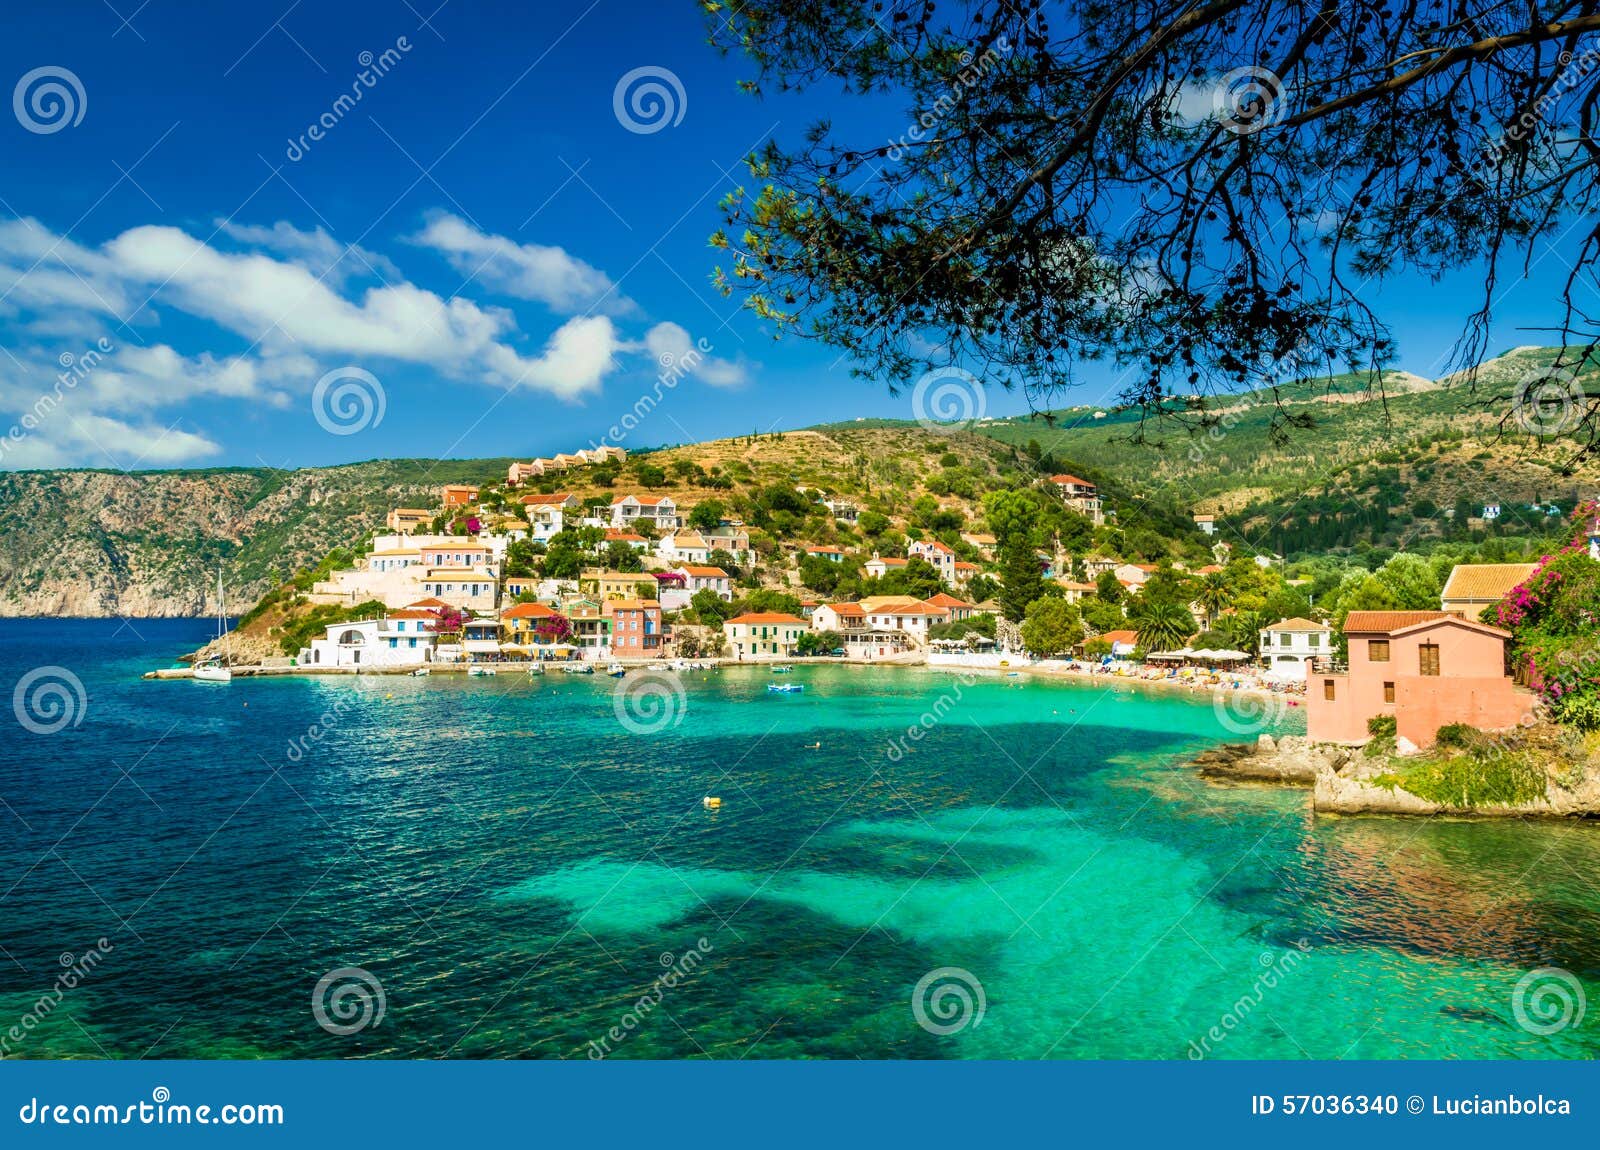 assos on the island of kefalonia in greece